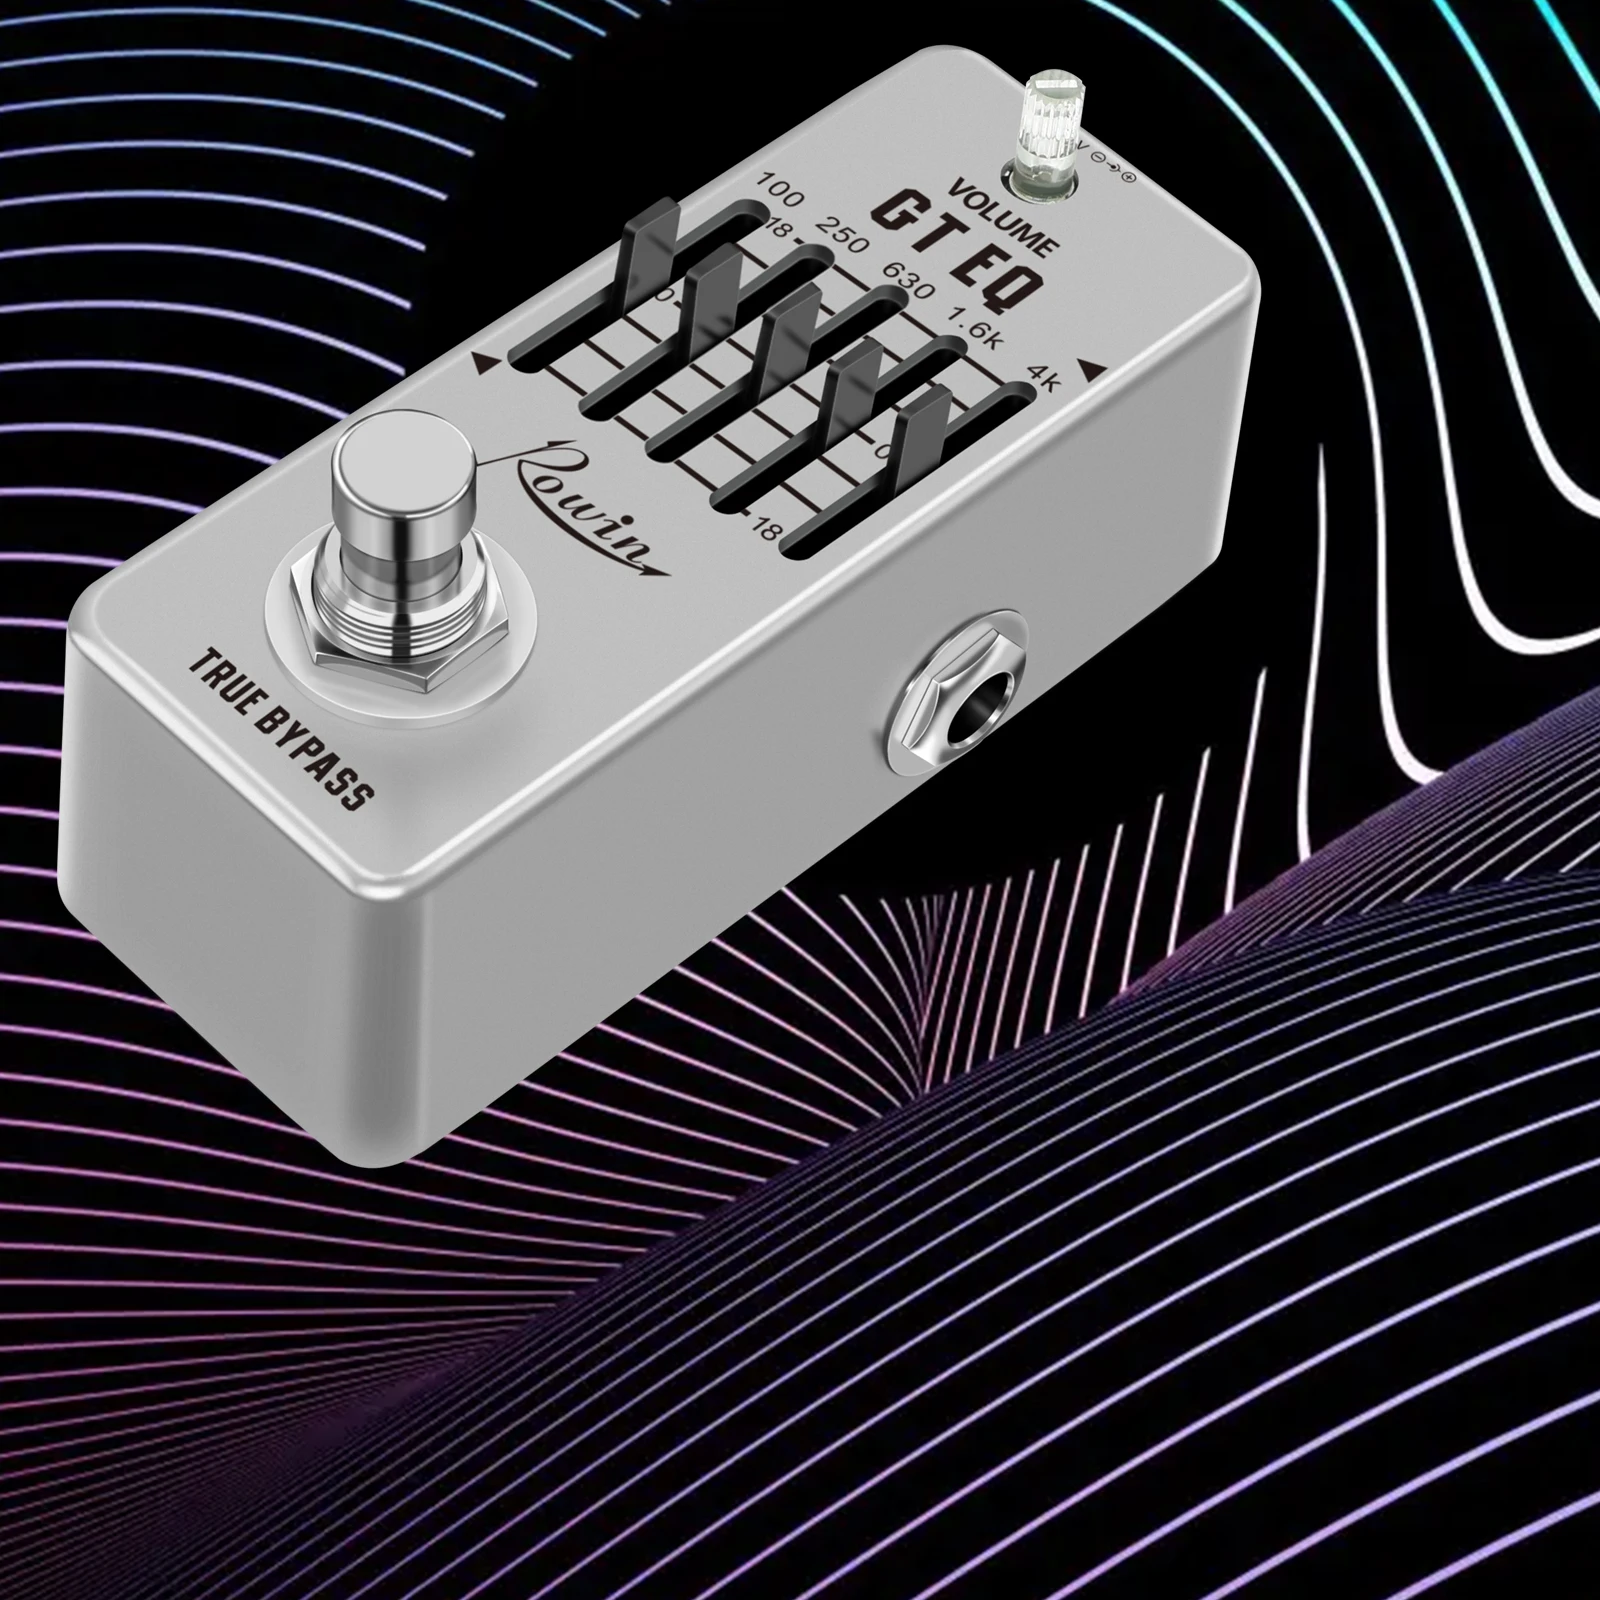 

Rowin LEF-317A Guitar Equalizer Pedal 5-band Parametric EQ Guitar Effect Pedal Frequency Compensator ±18dB Range for Mini Si